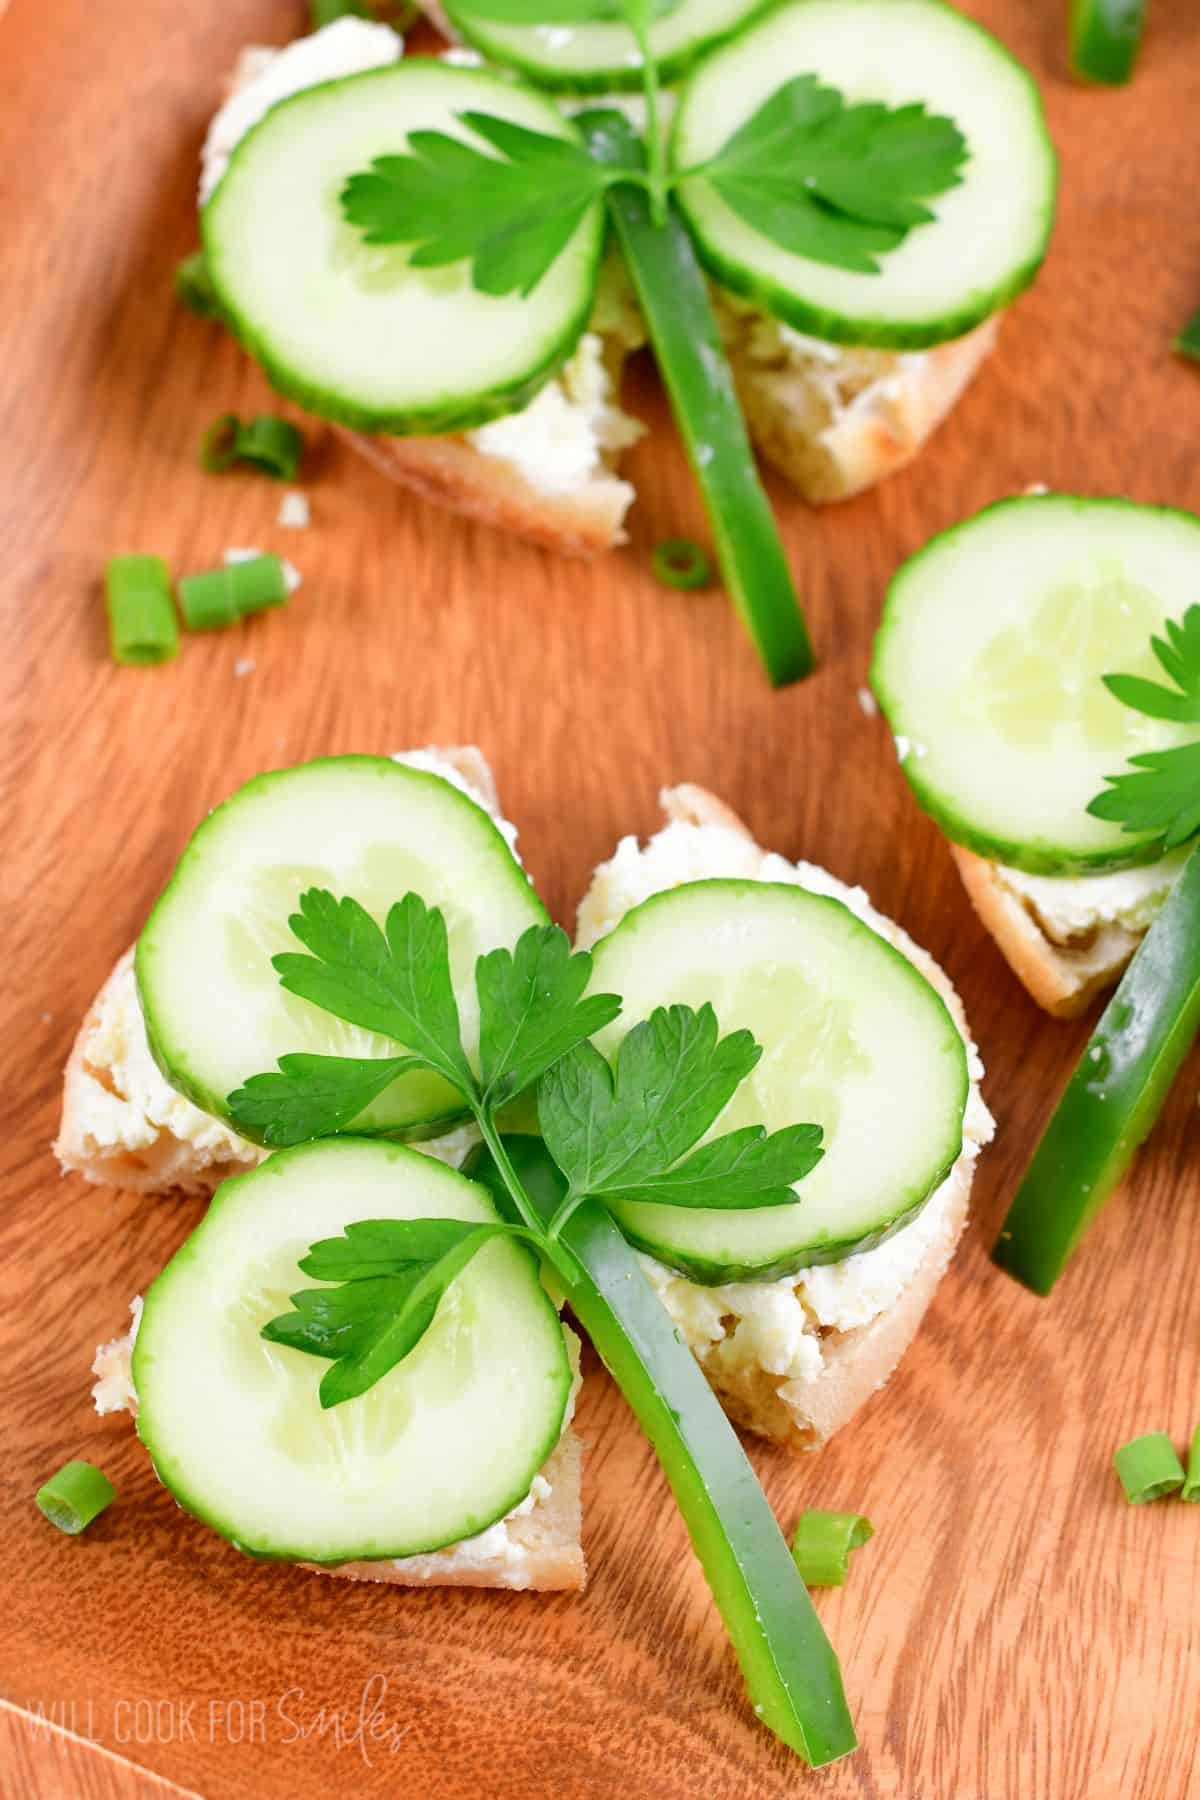 shamrock Sandwich with cream cheese, cucumber, parsley, and green pepper.